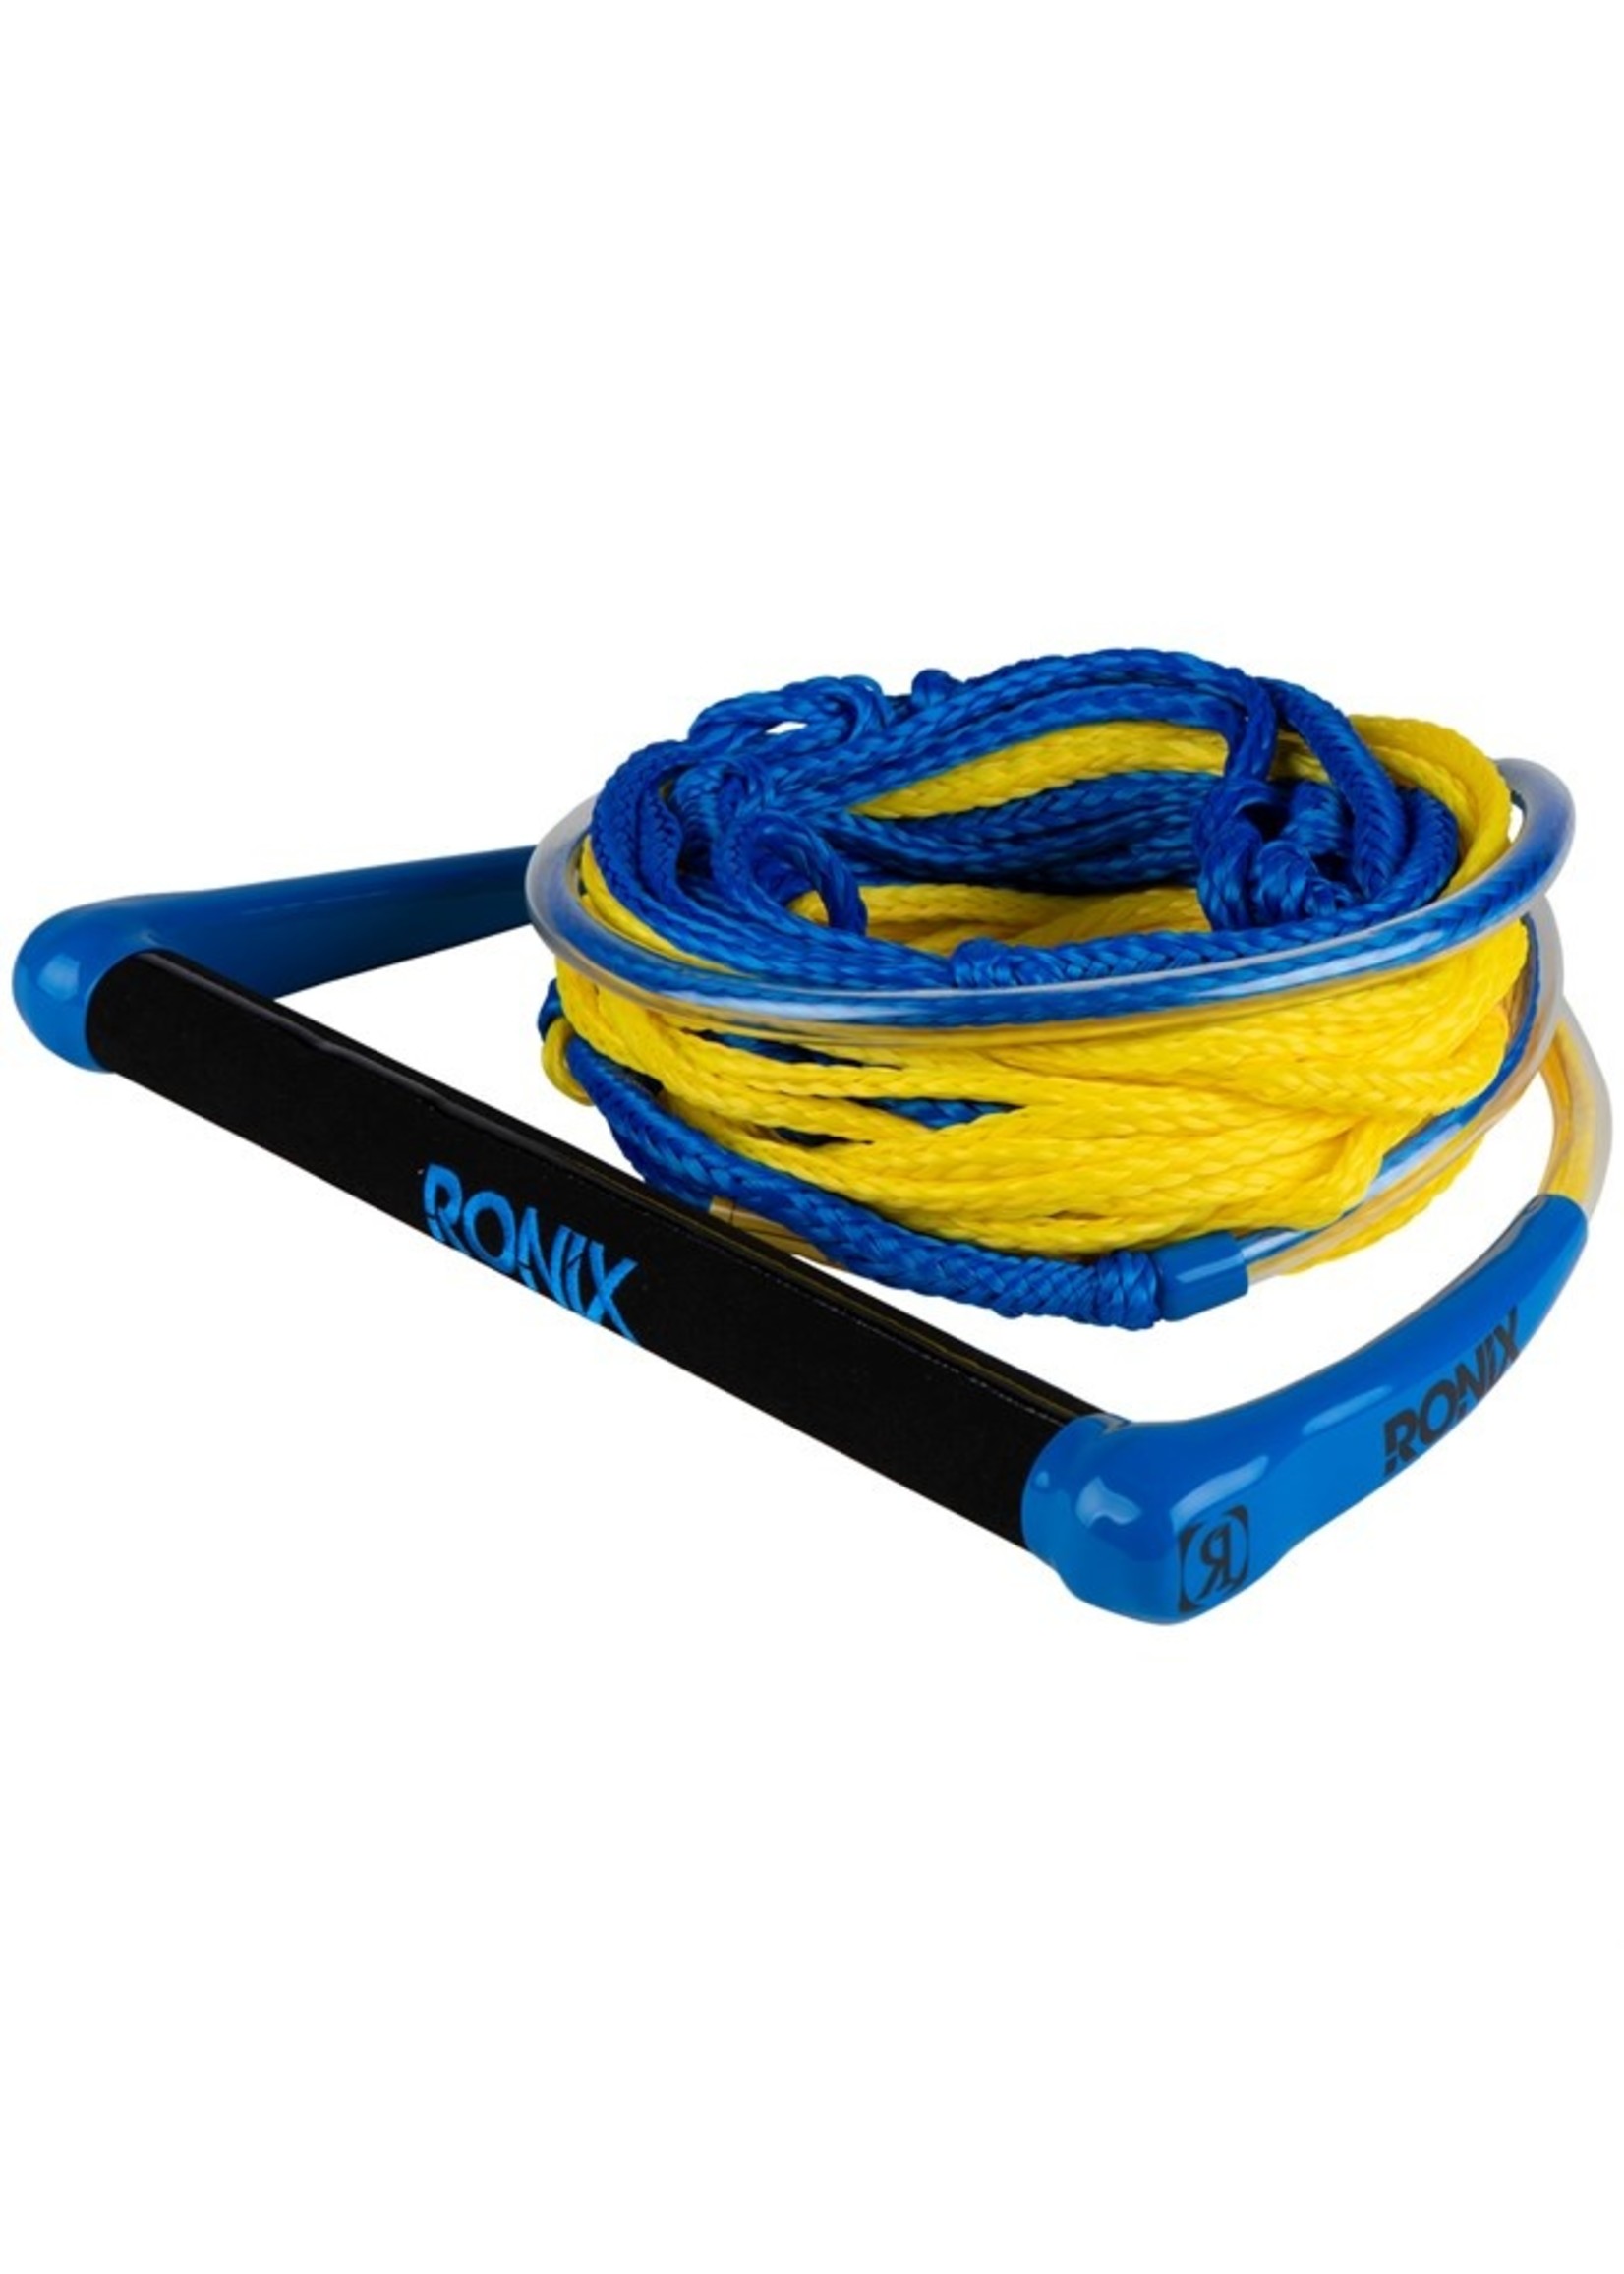 Ronix 2.0 HIDE 65FT ROPE